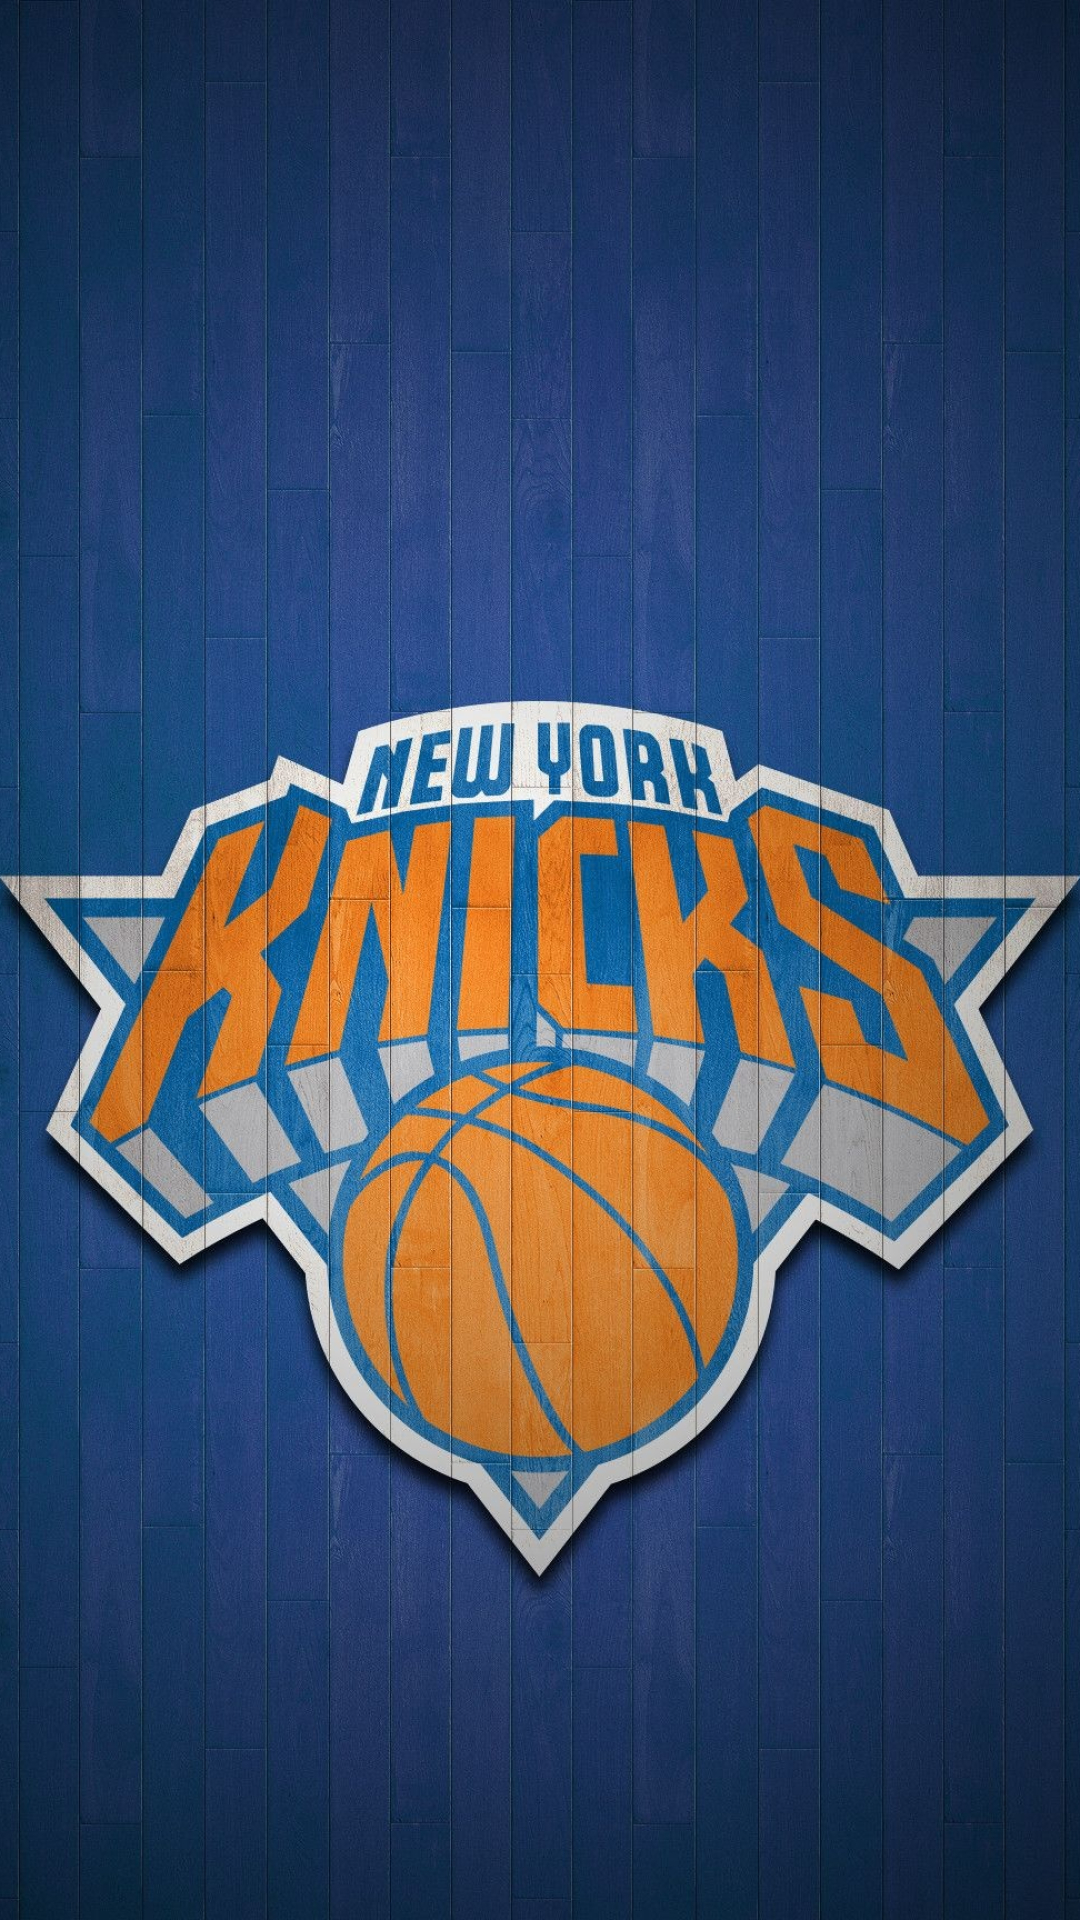 New York Knicks, iPhone wallpapers, Top backgrounds, NBA fans, 1080x1920 Full HD Phone